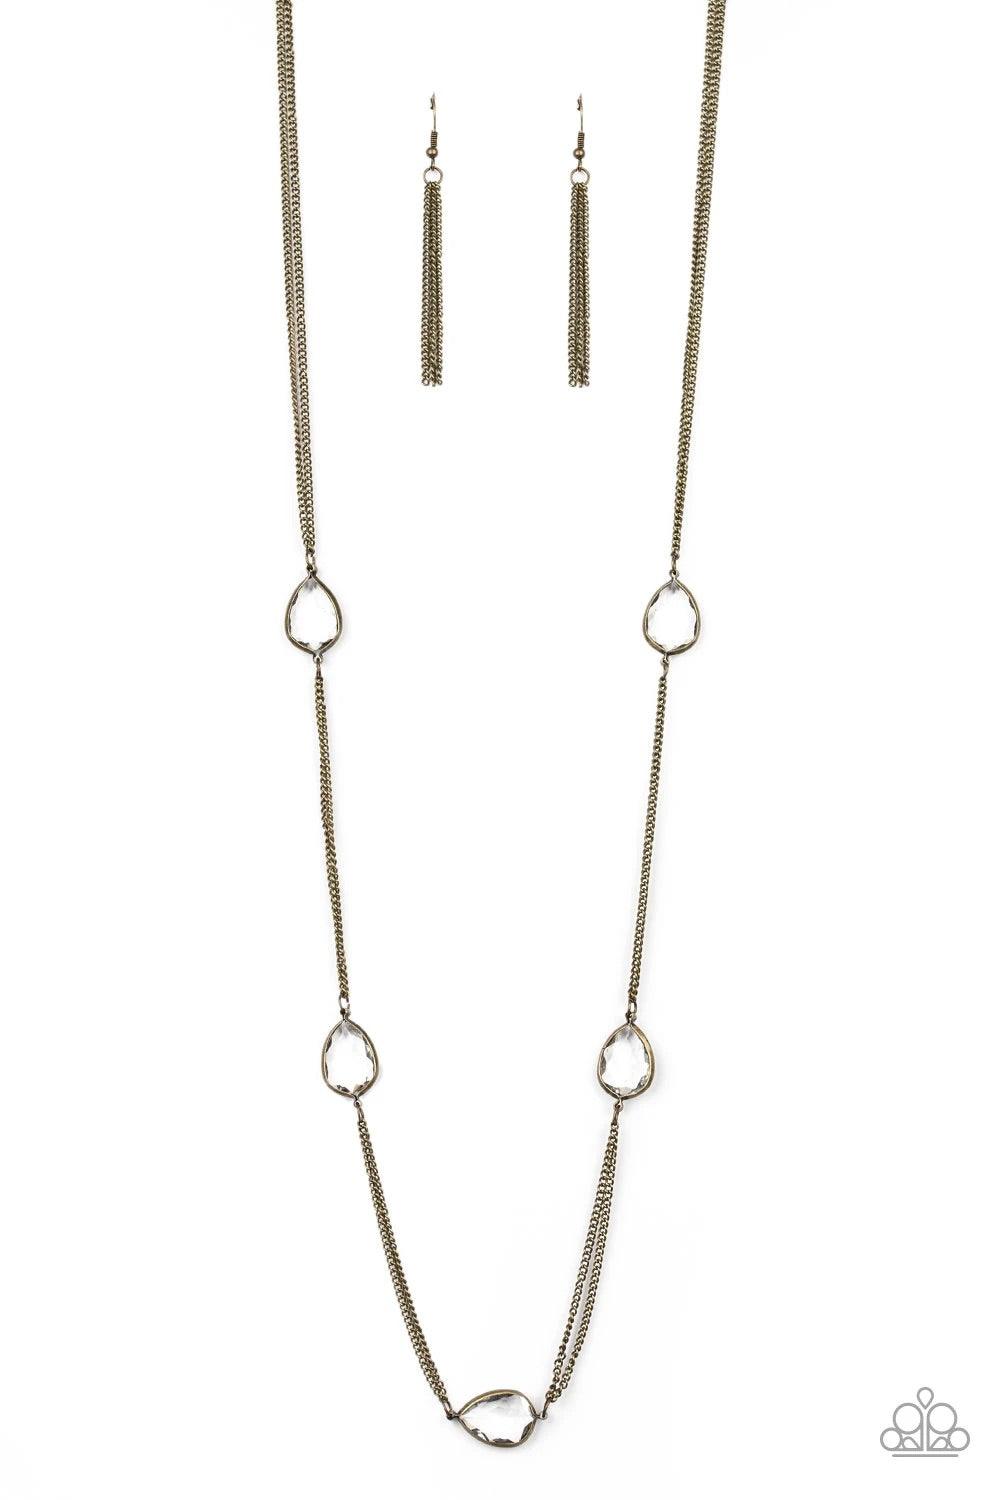 Paparazzi Accessories Teardrop Timelessness - Brass Glassy white teardrops attach to sections of antiqued brass chain across the chest, creating a refined display. Features an adjustable clasp closure. Jewelry